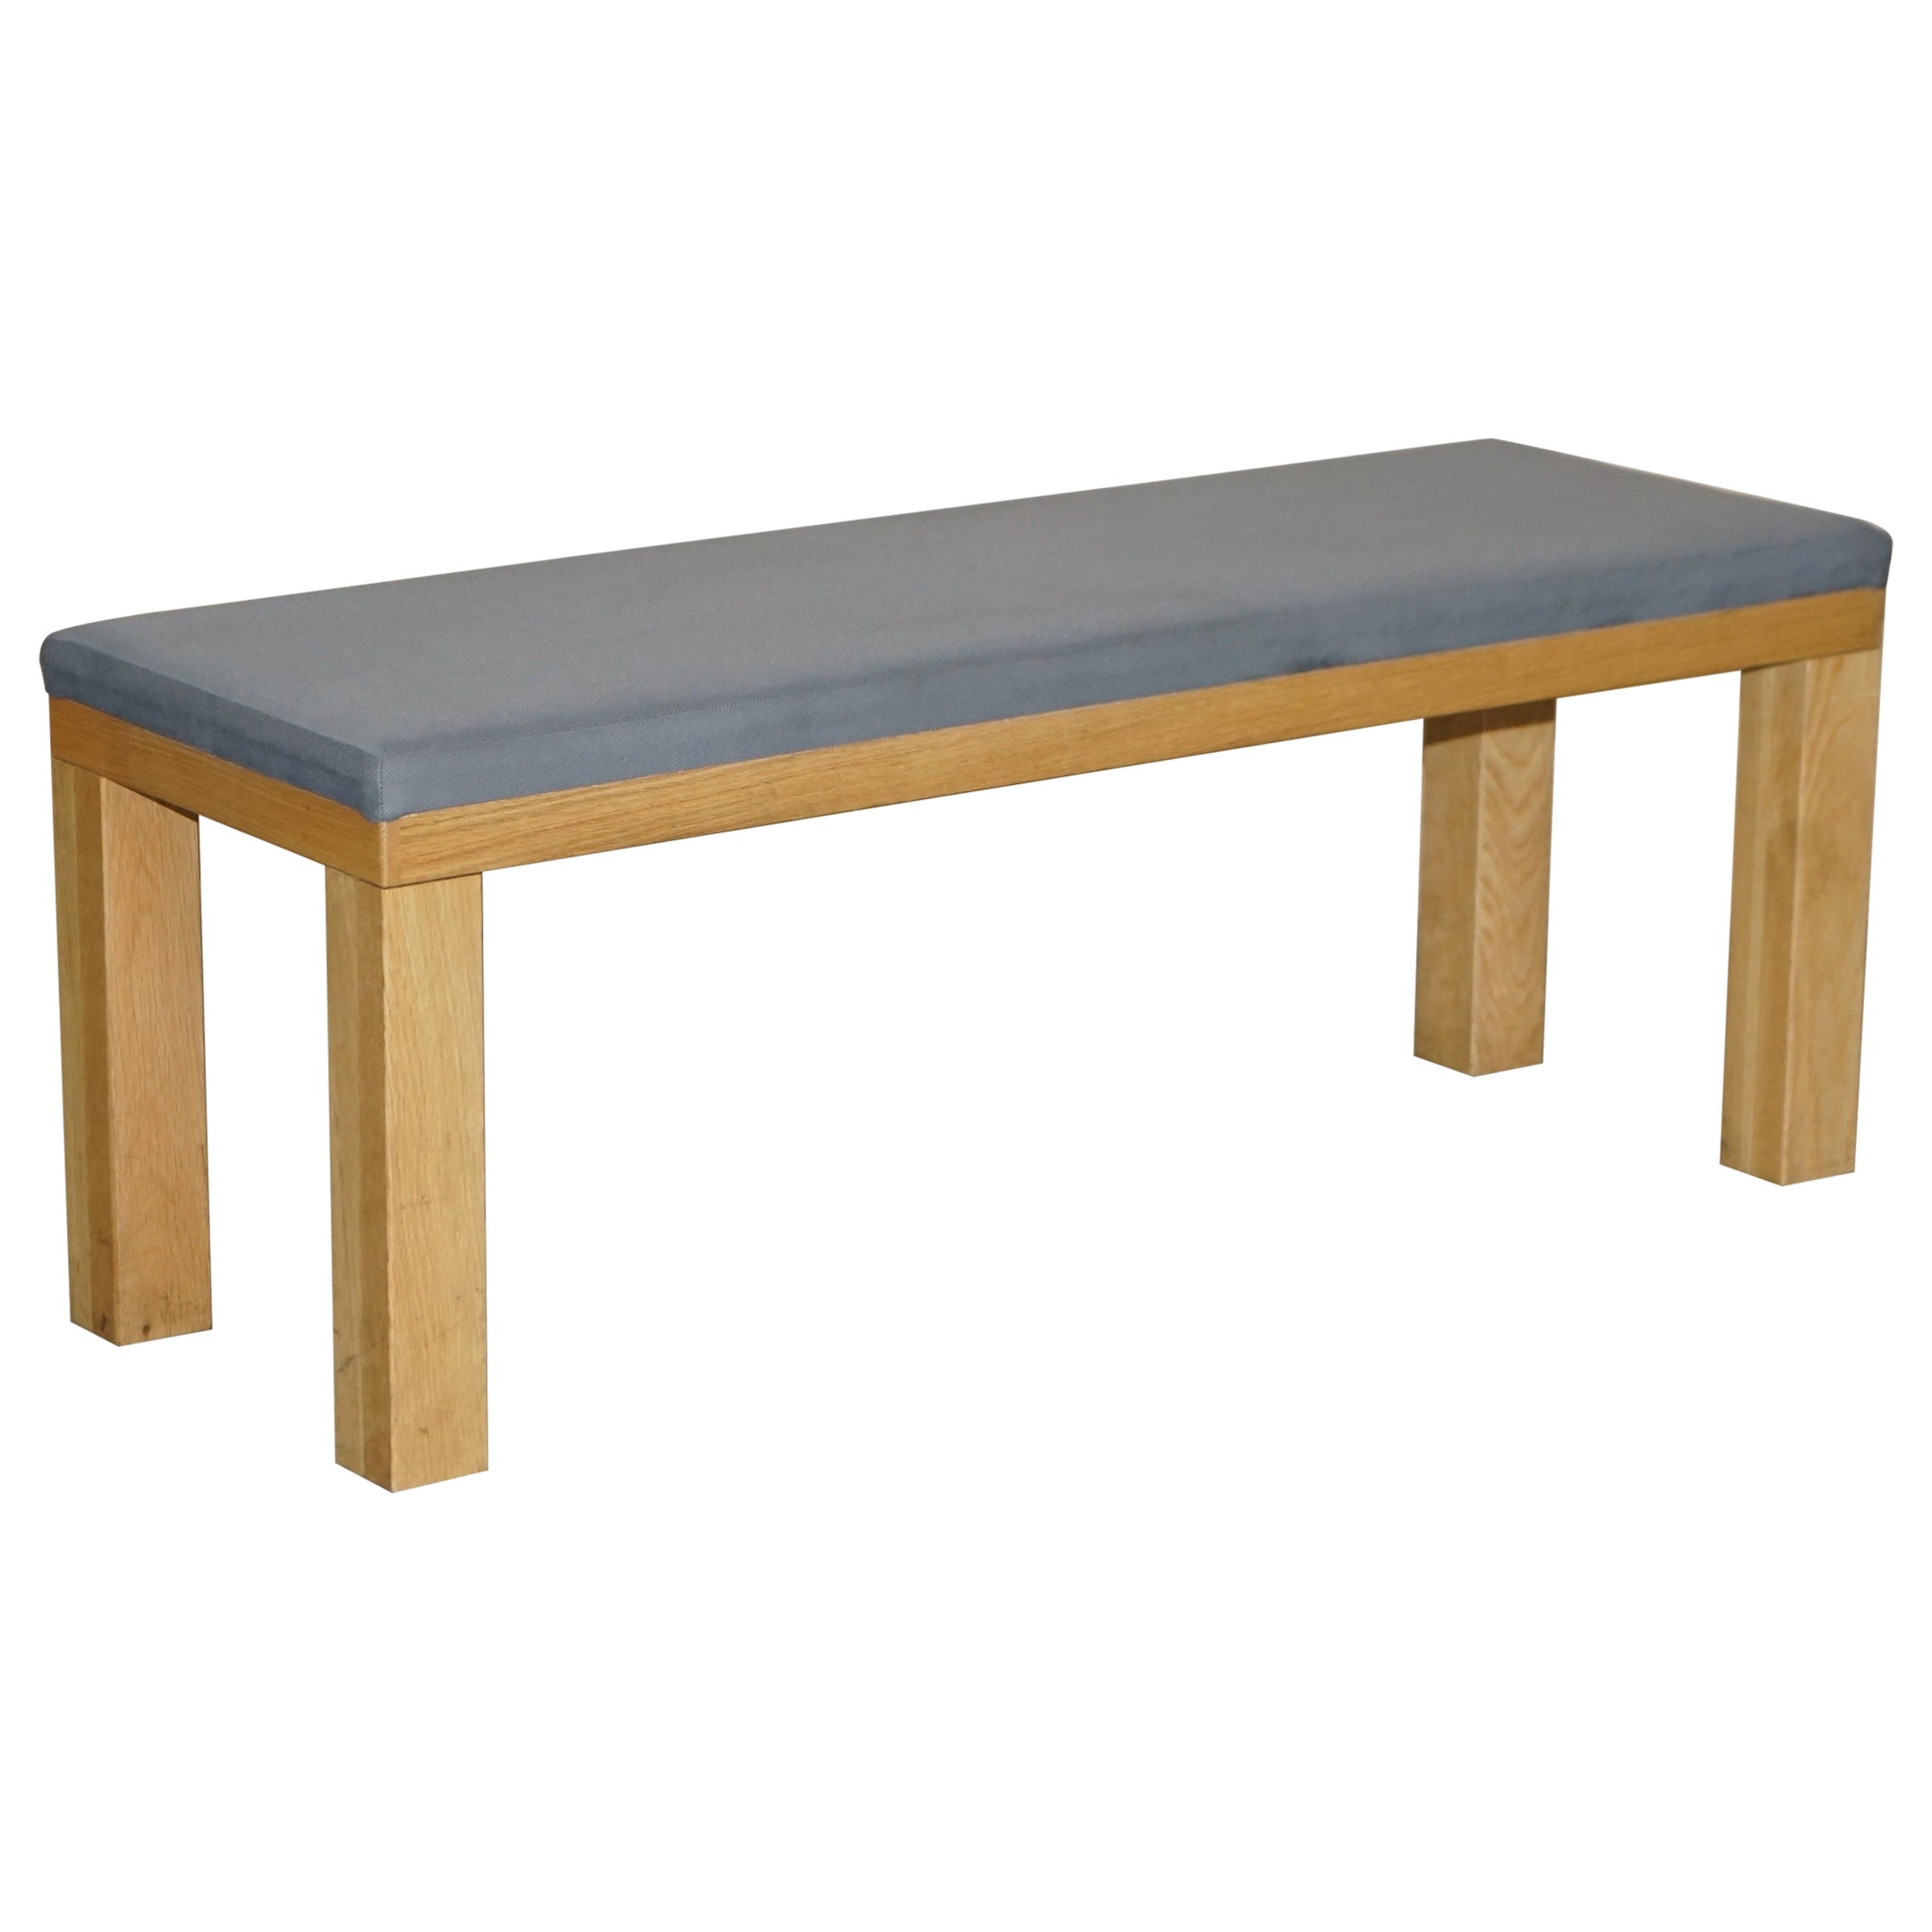 James Burleigh Kitchen Dining Table Bench Sizes Colours & Available For Sale